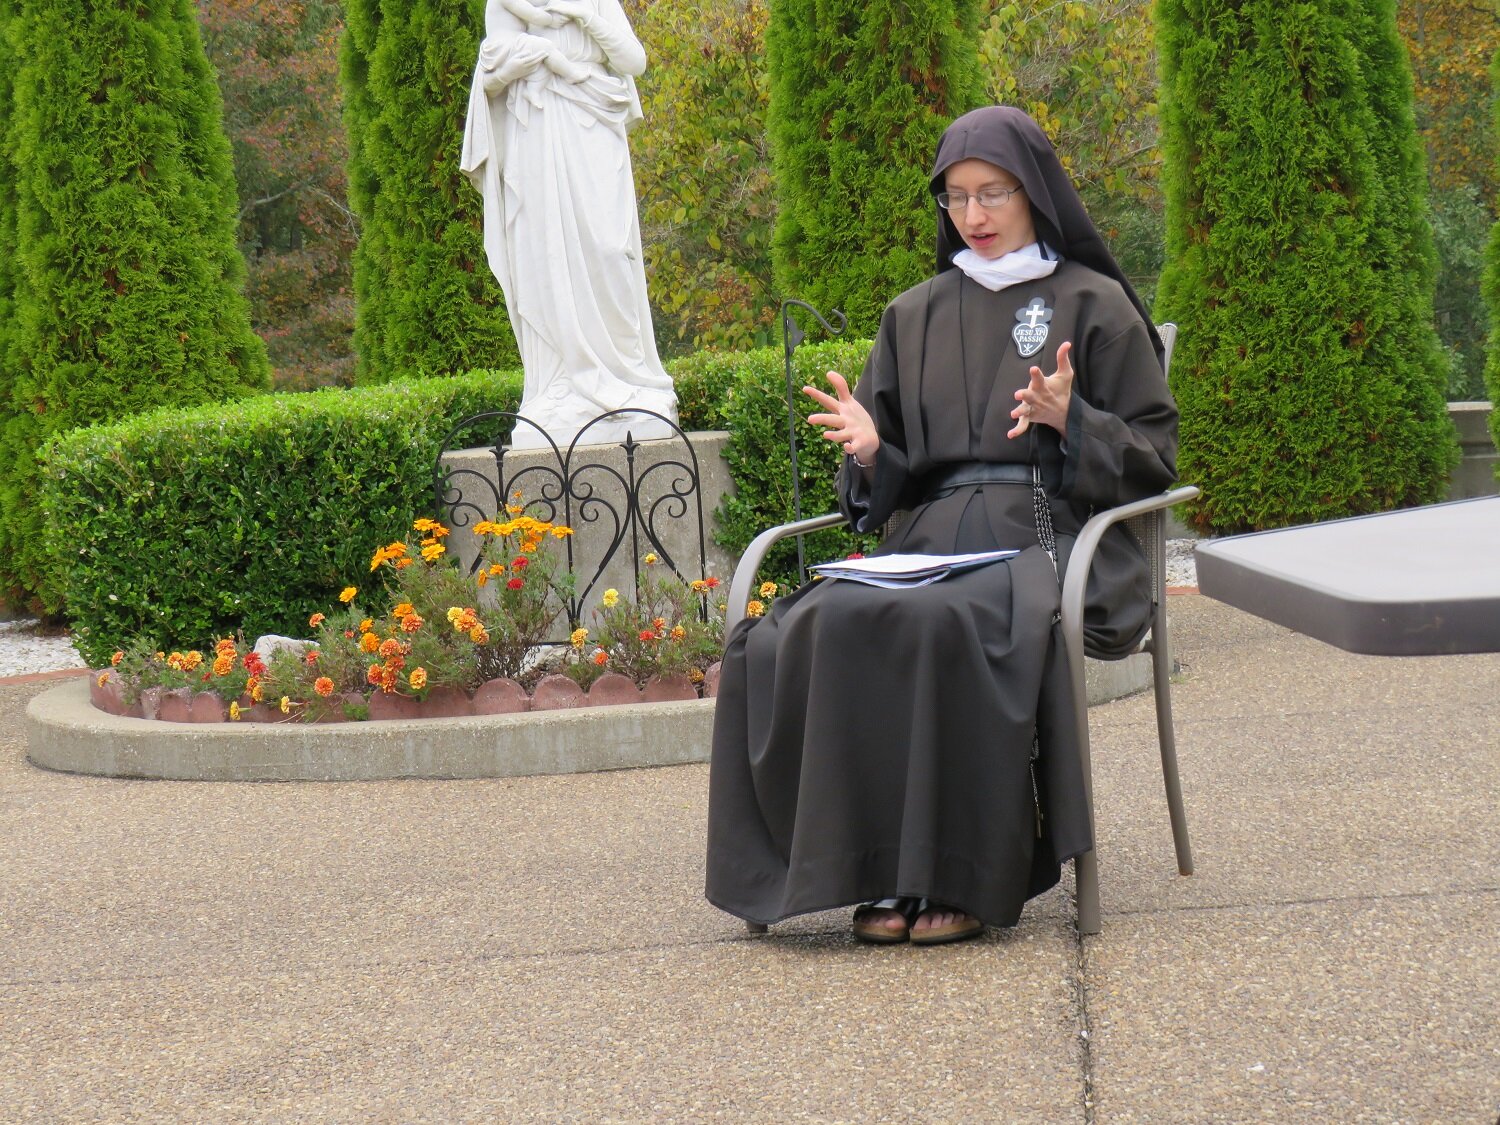  Sharing the beauty of Passionist life 